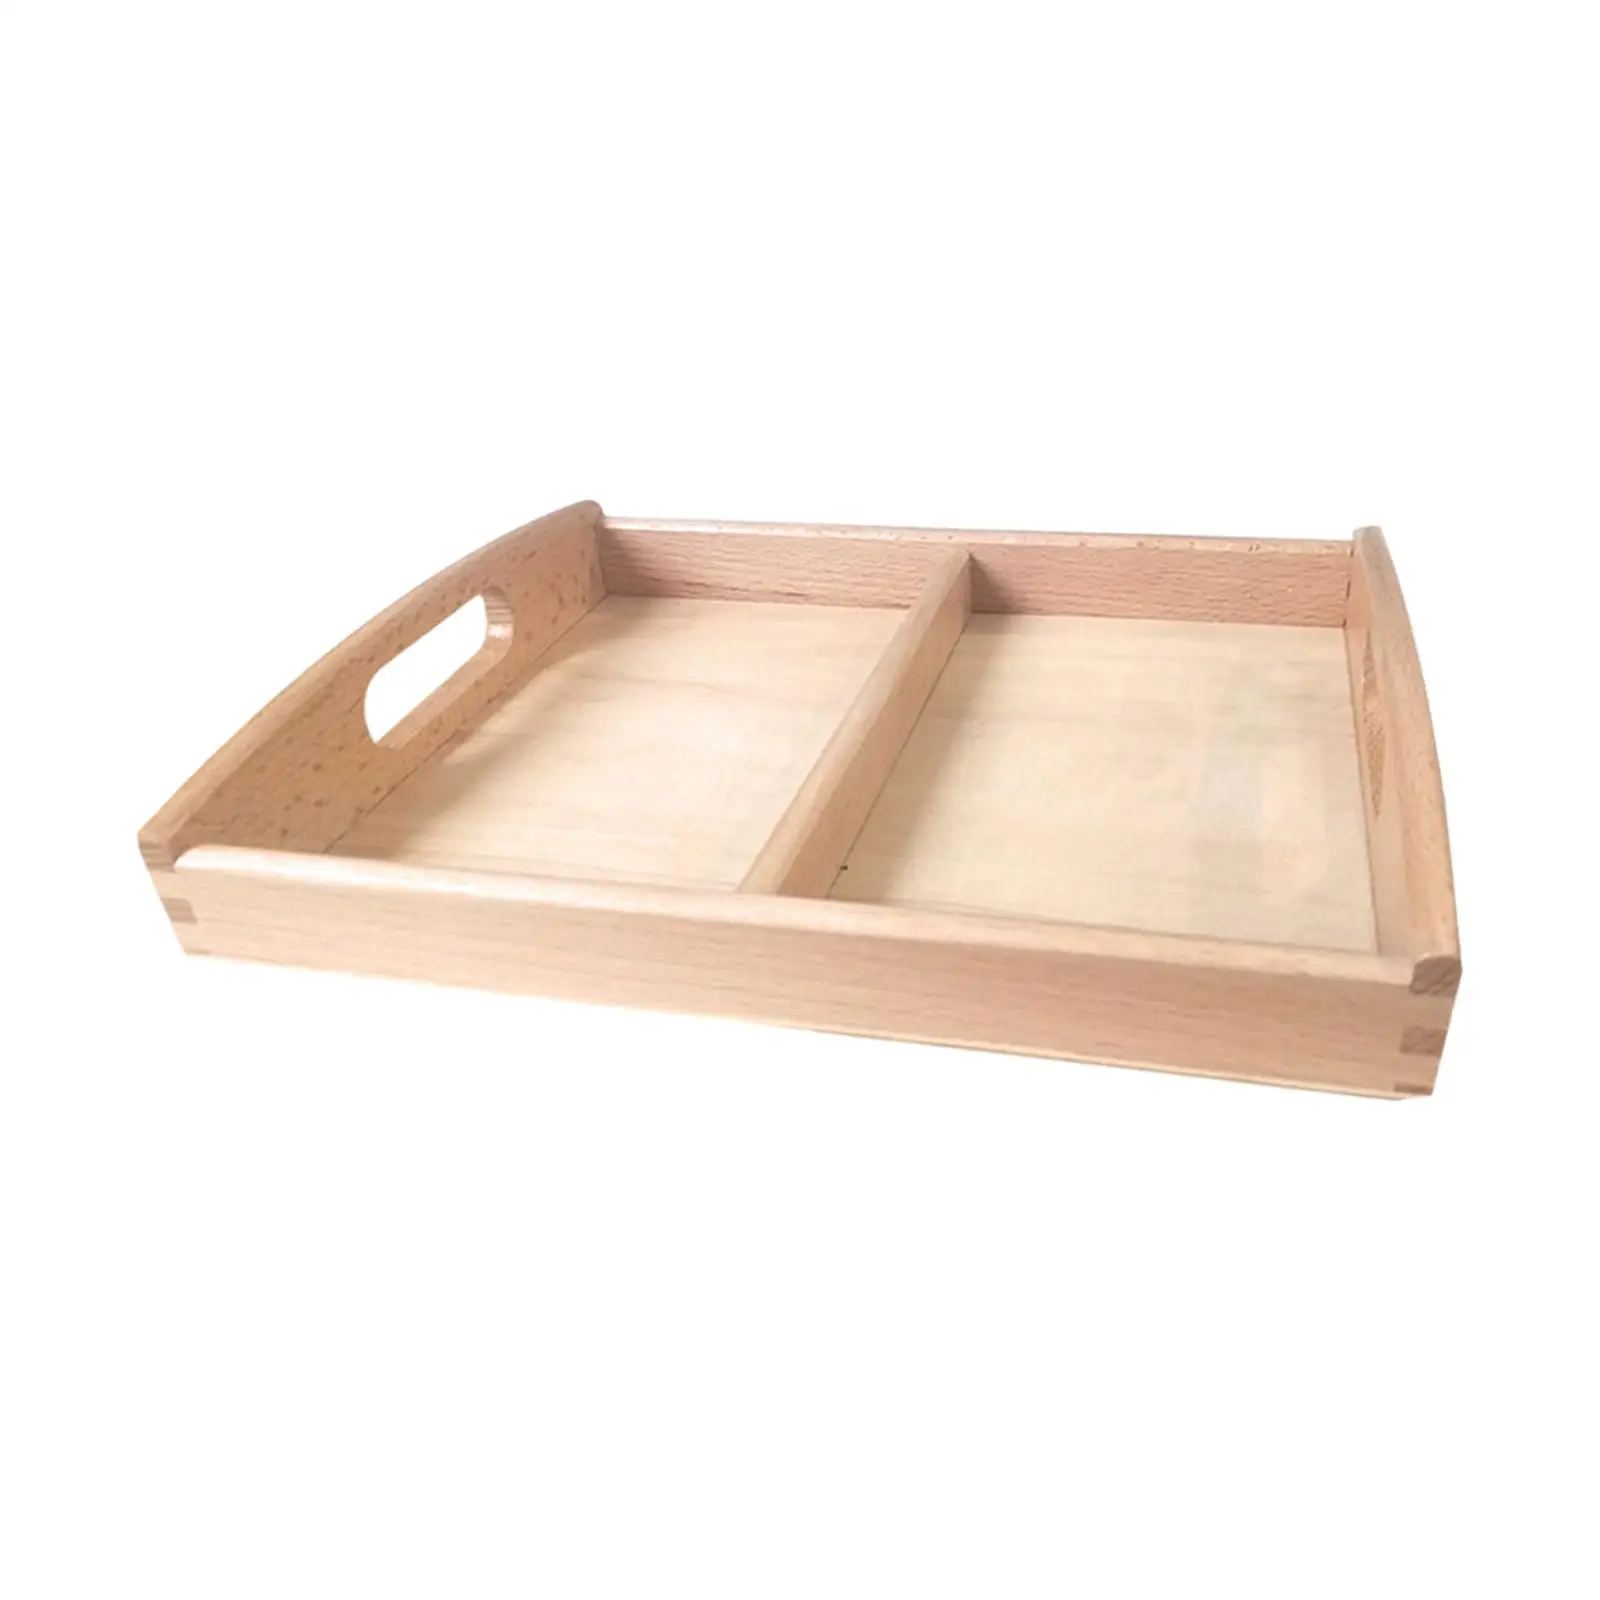 Montessori Wooden Sorting Tray Two Compartments Toys Holder for Card Display